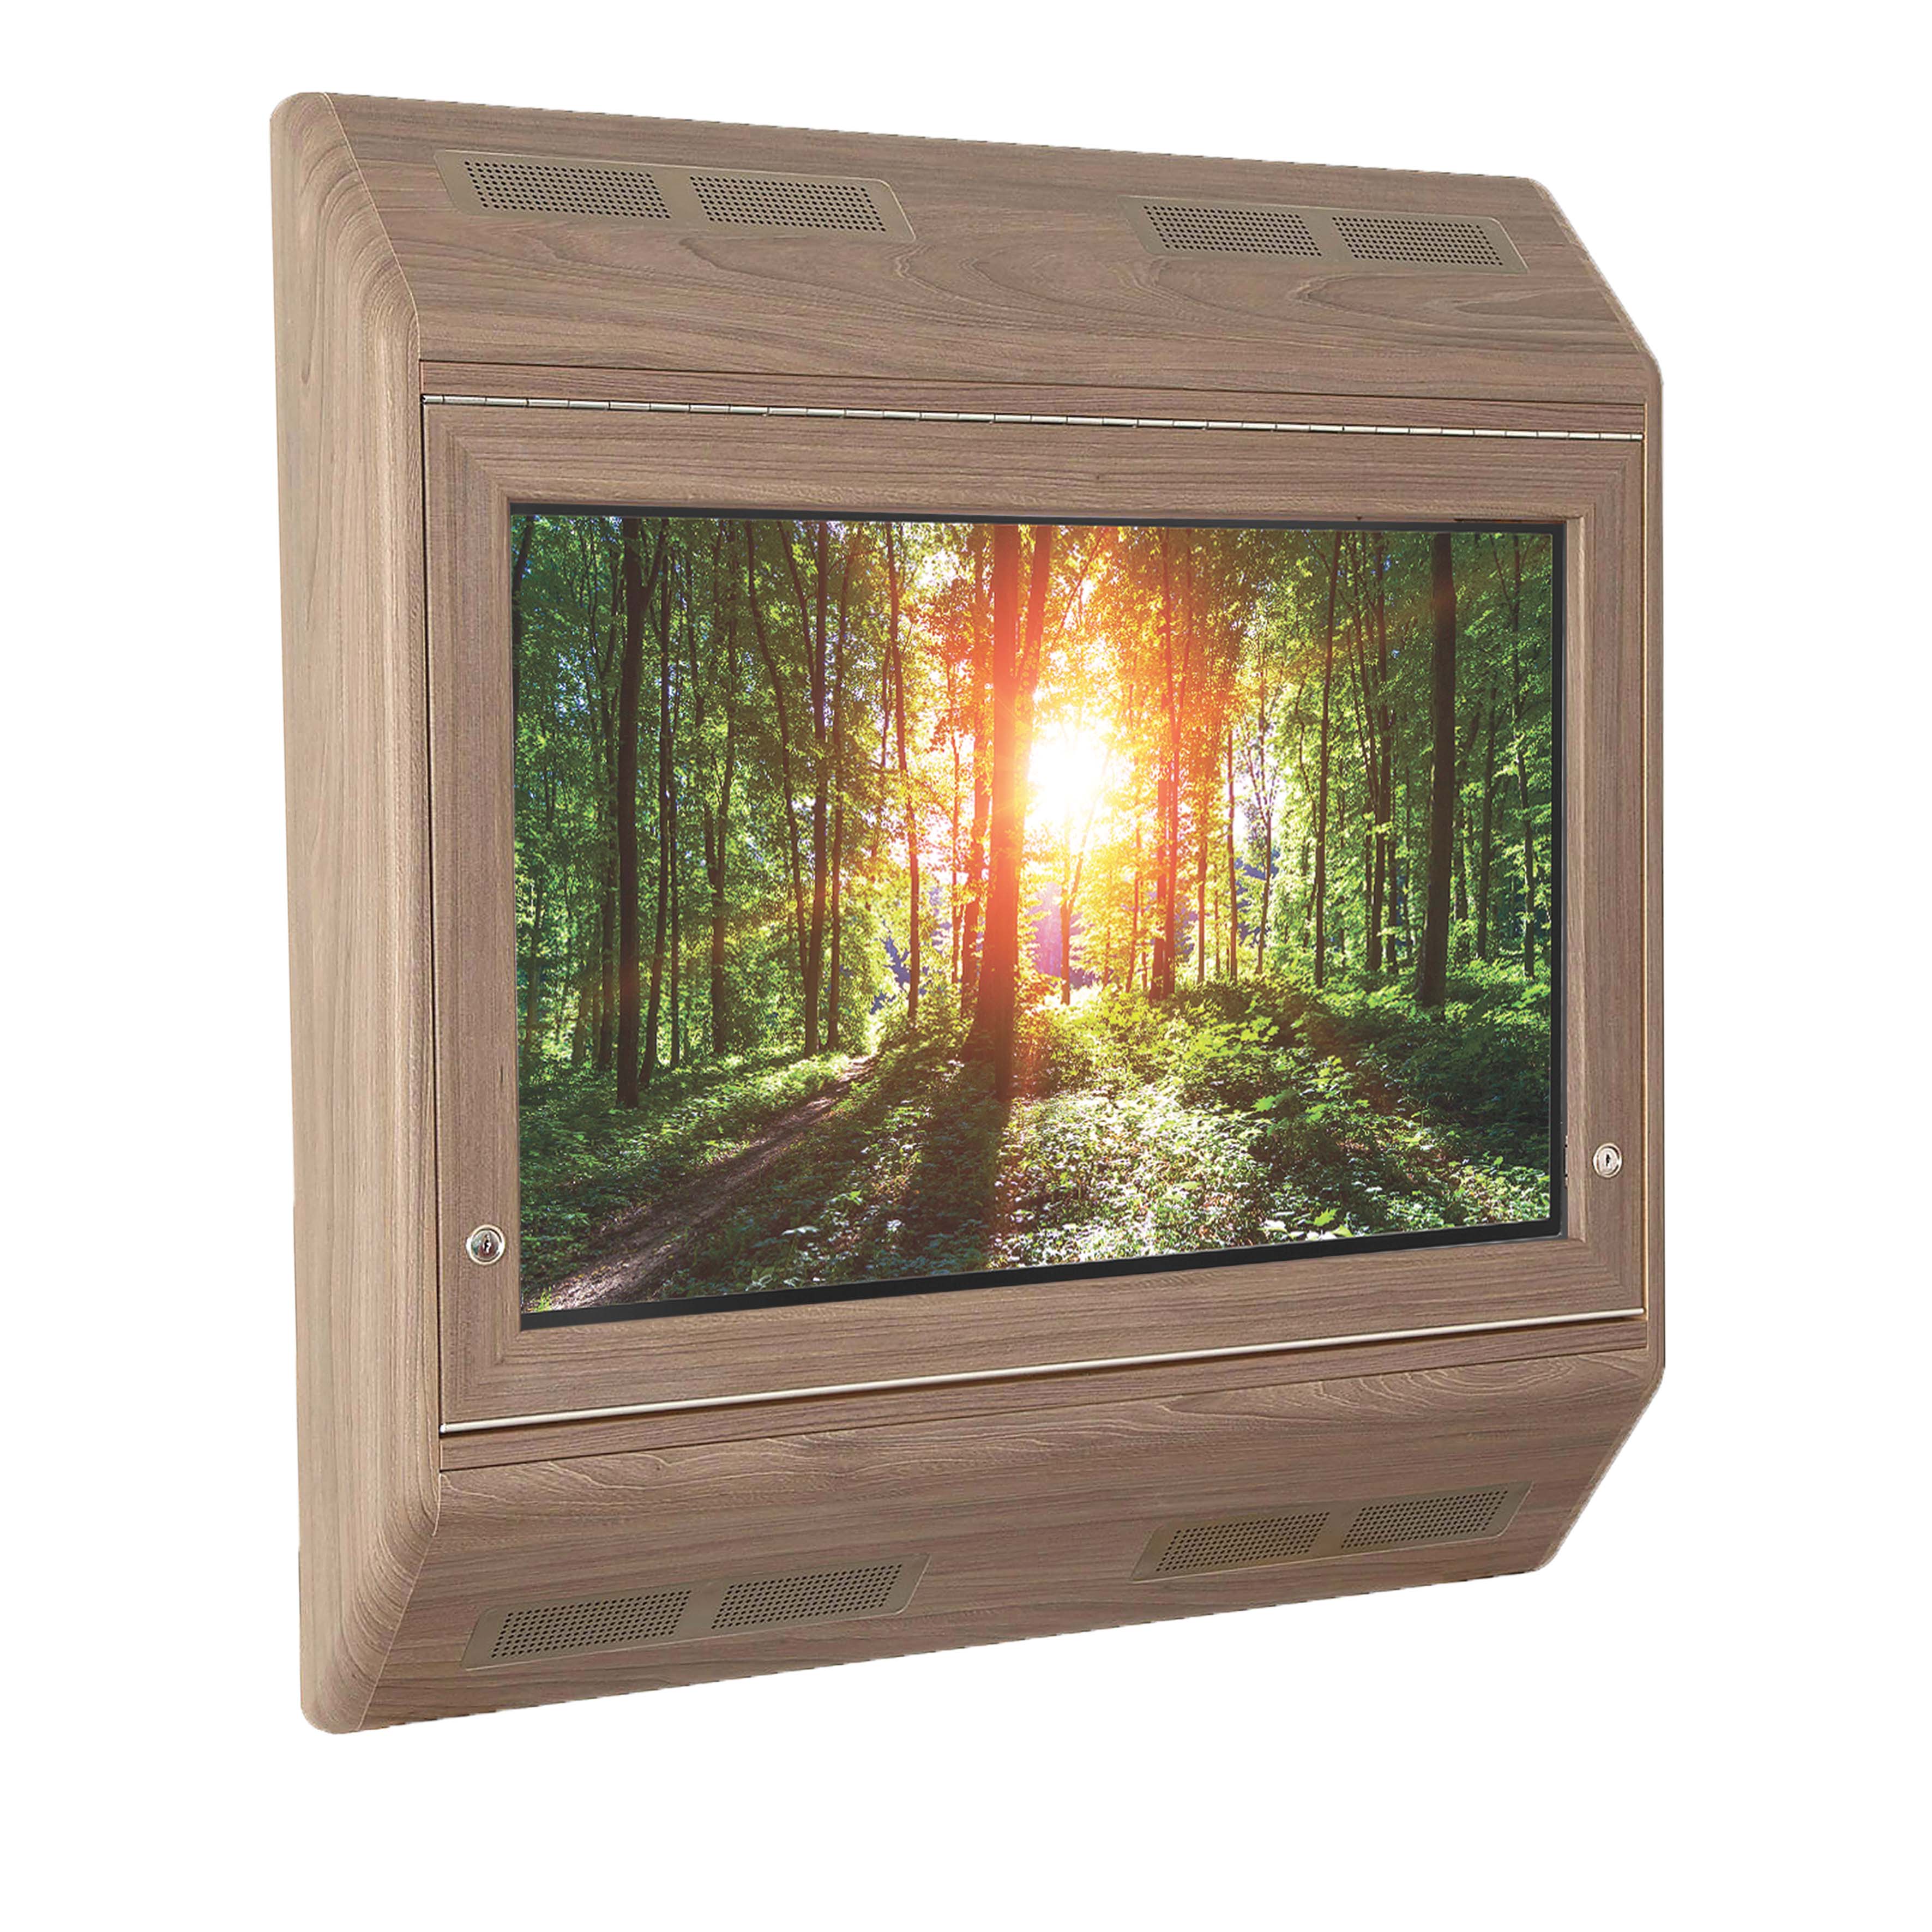 TV Protection Cabinets 1